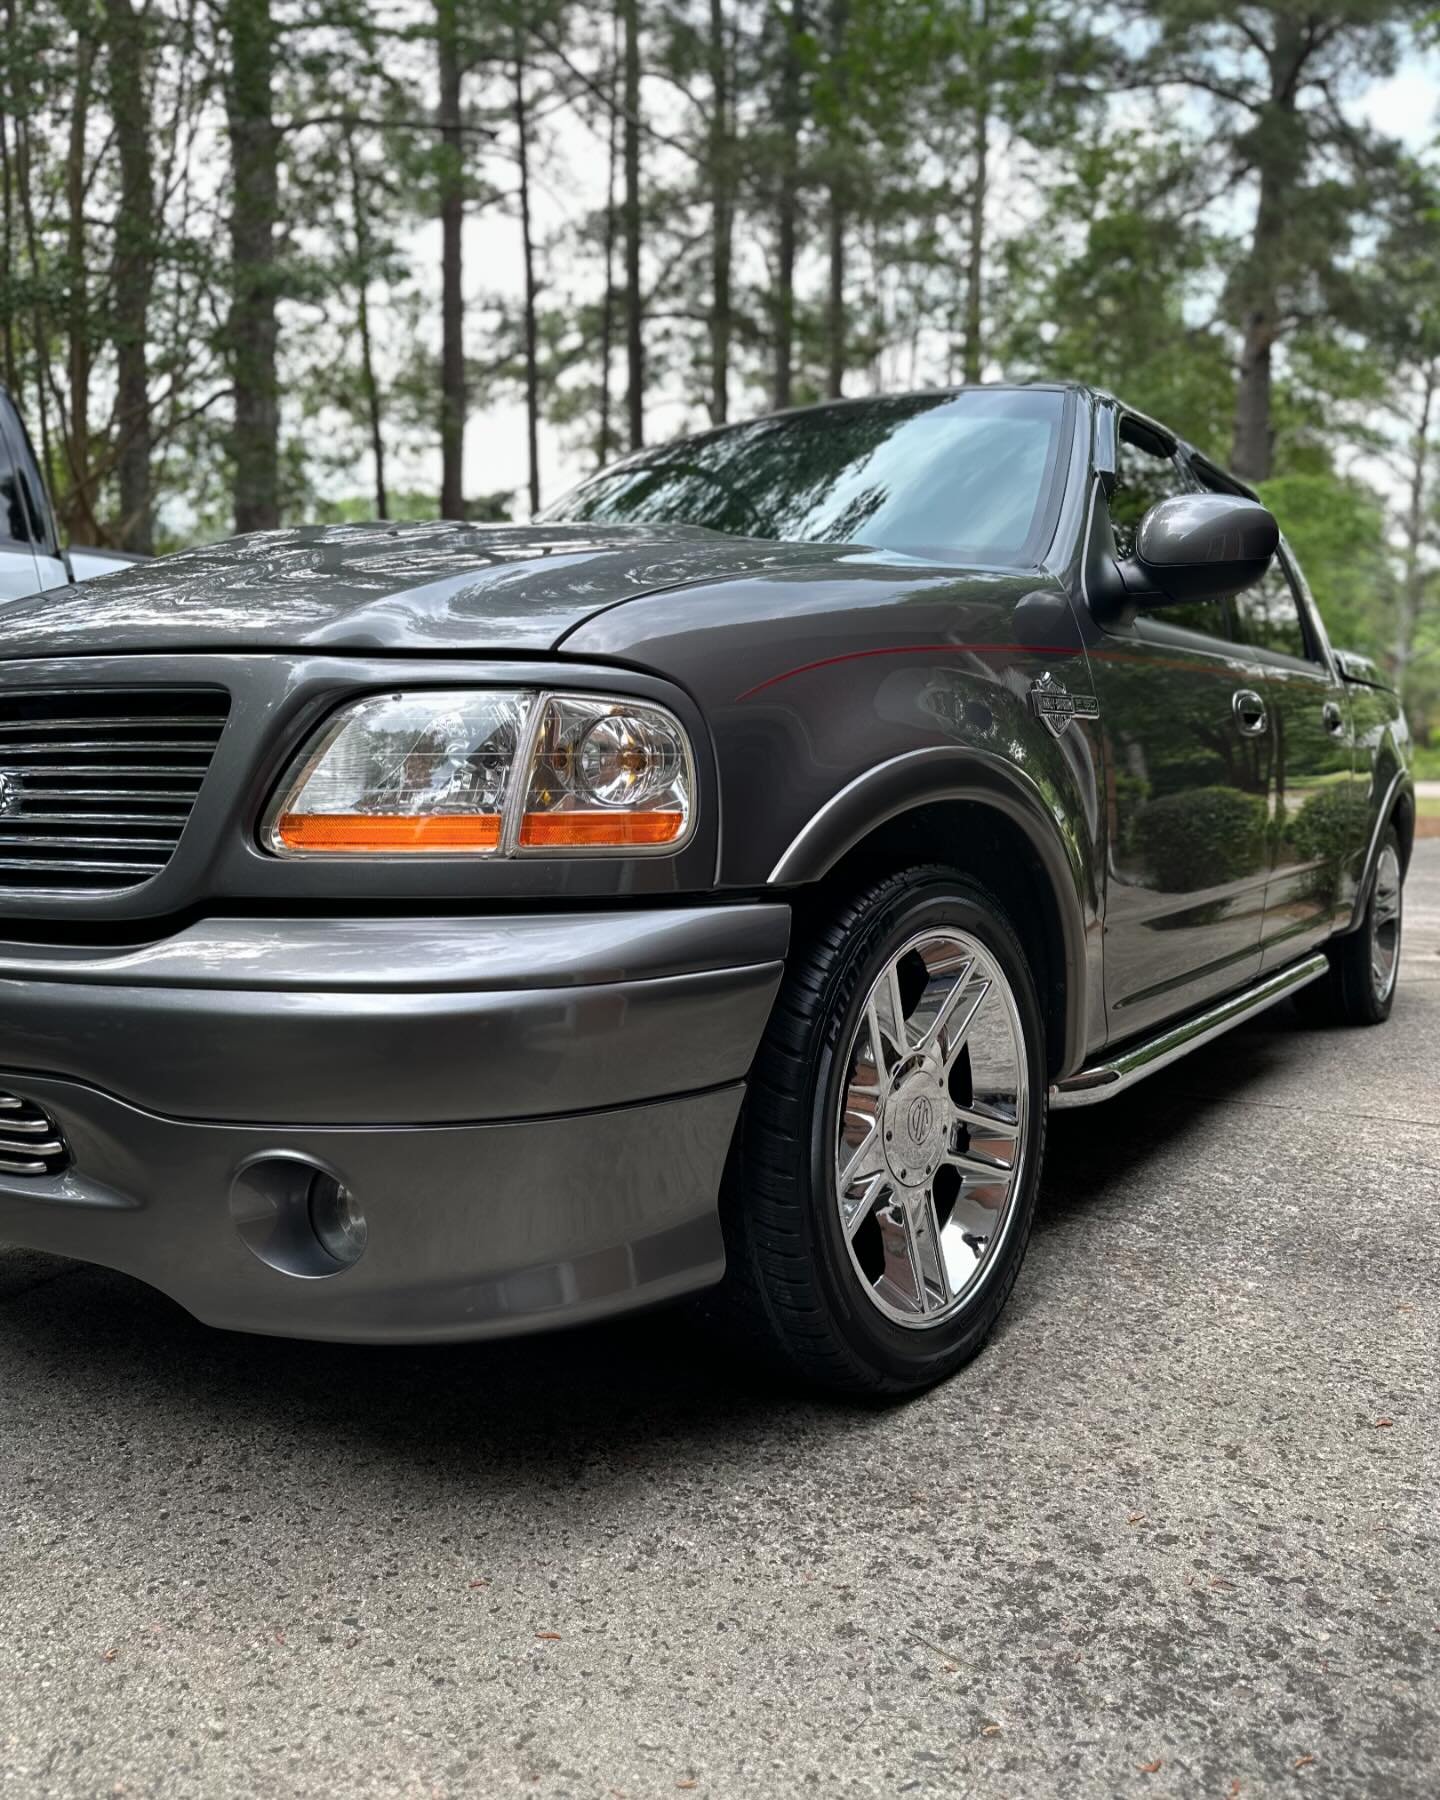 The second truck I was able to get taken care of for Mr. Tom today. Loved getting this beauty some protection on it. 

  2002 Ford F150 Harley-Davidson 

✅ ECCD Decon Wash and Clay

✅ ECCD 5 Year Ceramic Coating 

✅ ECCD Ceramic Wheel Coating

✅ ECCD